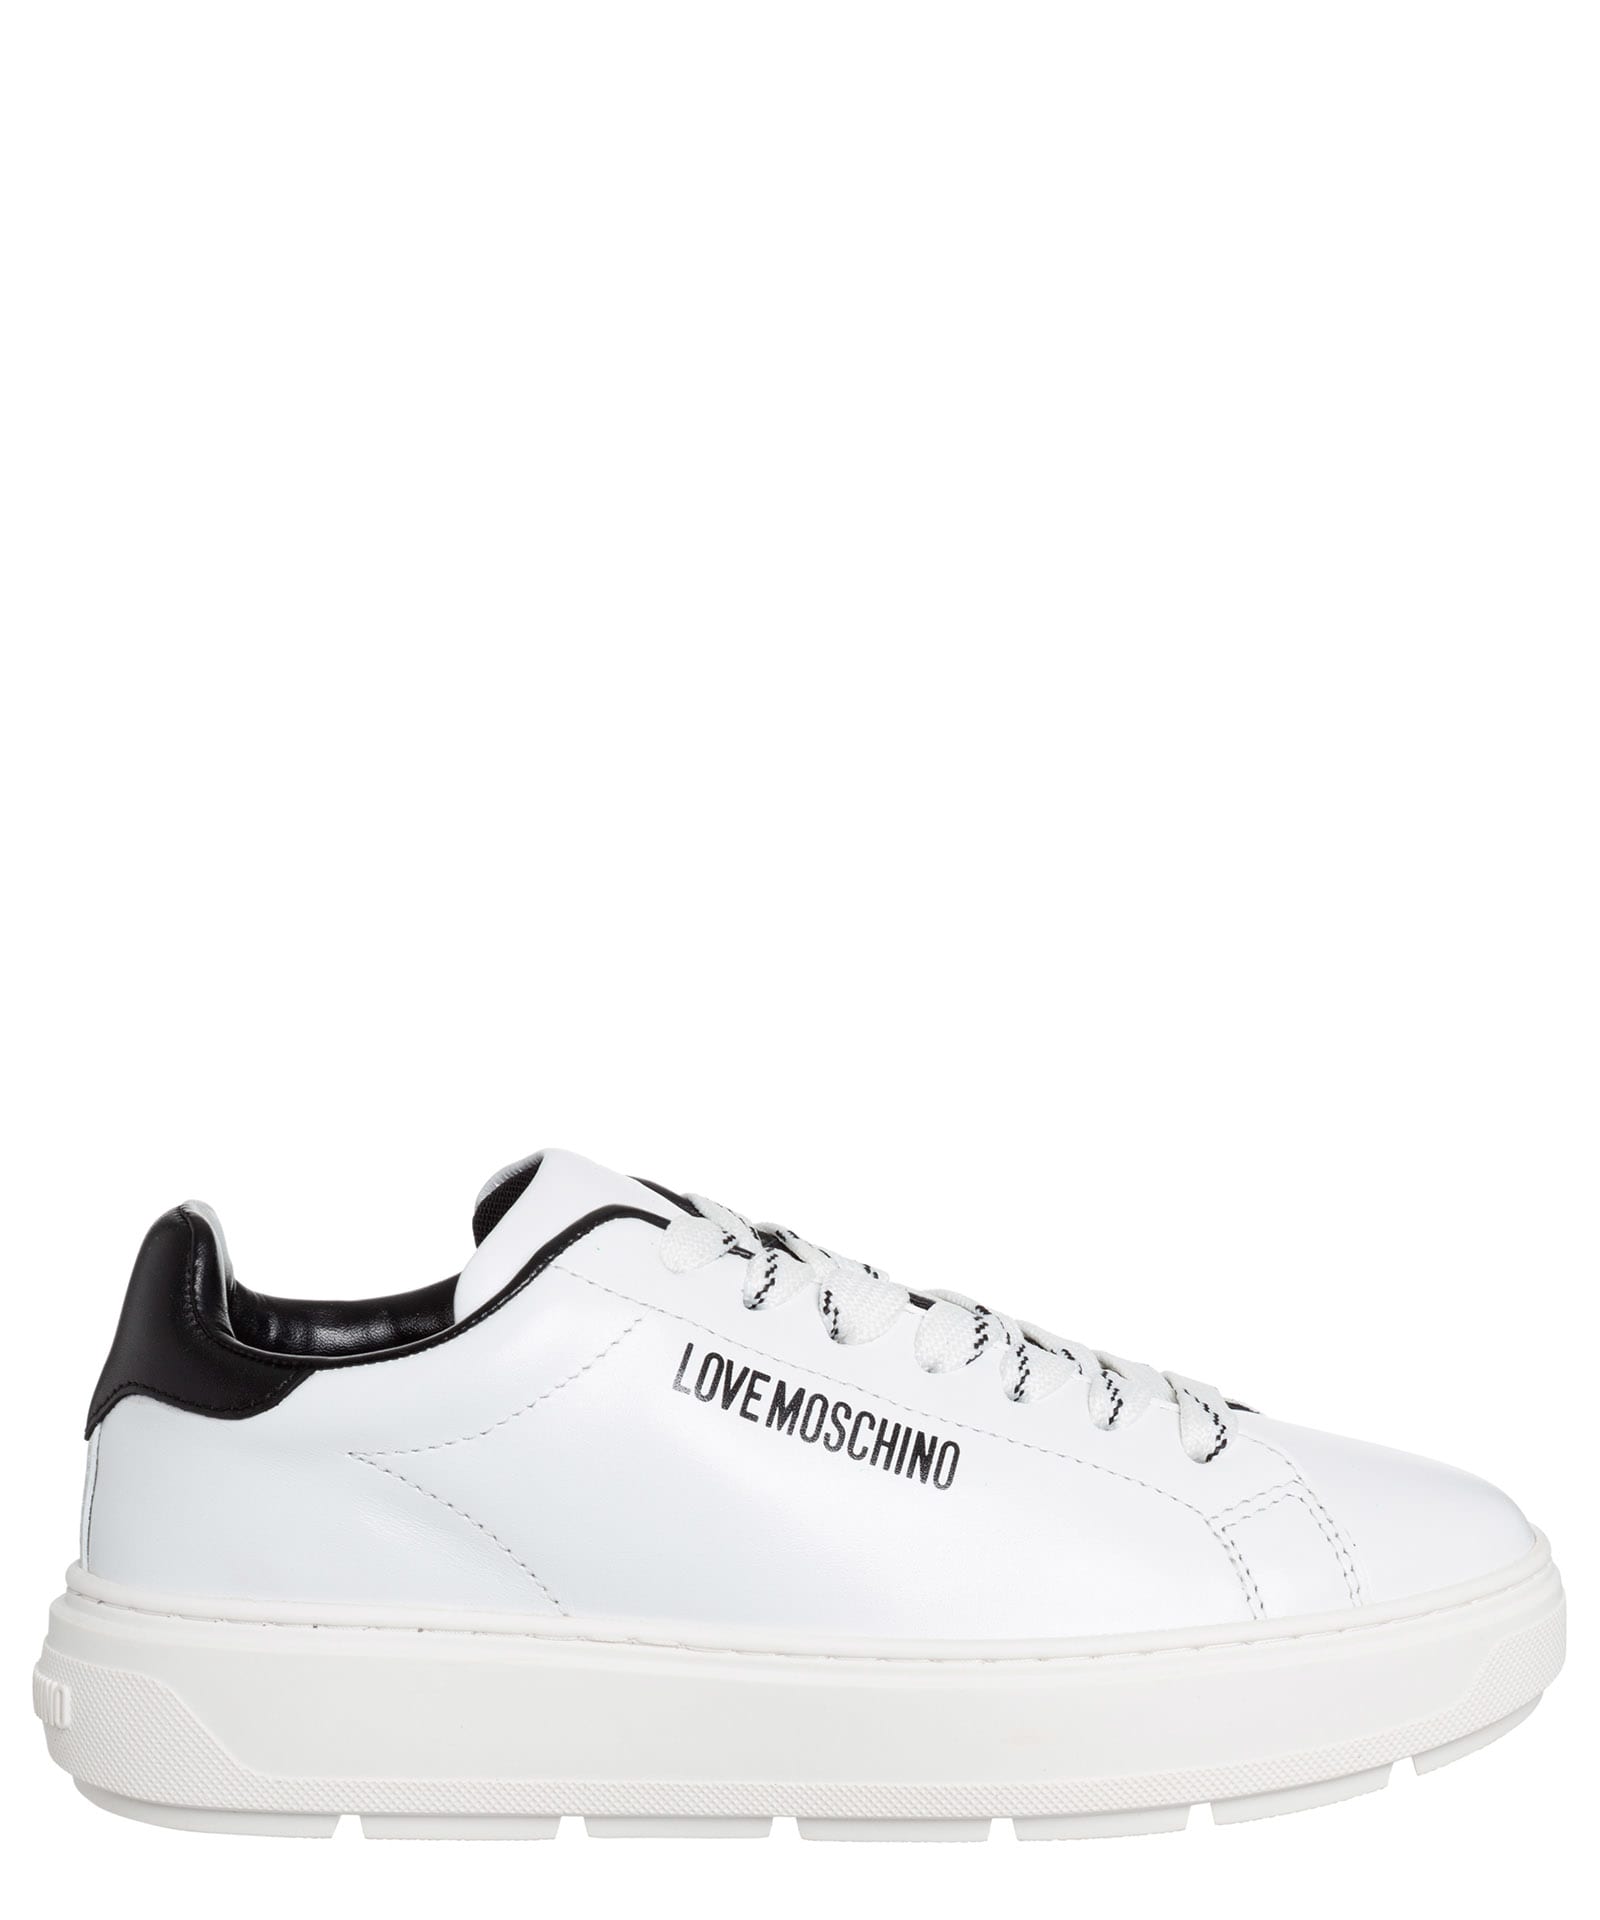 Love Moschino Leather Sneakers